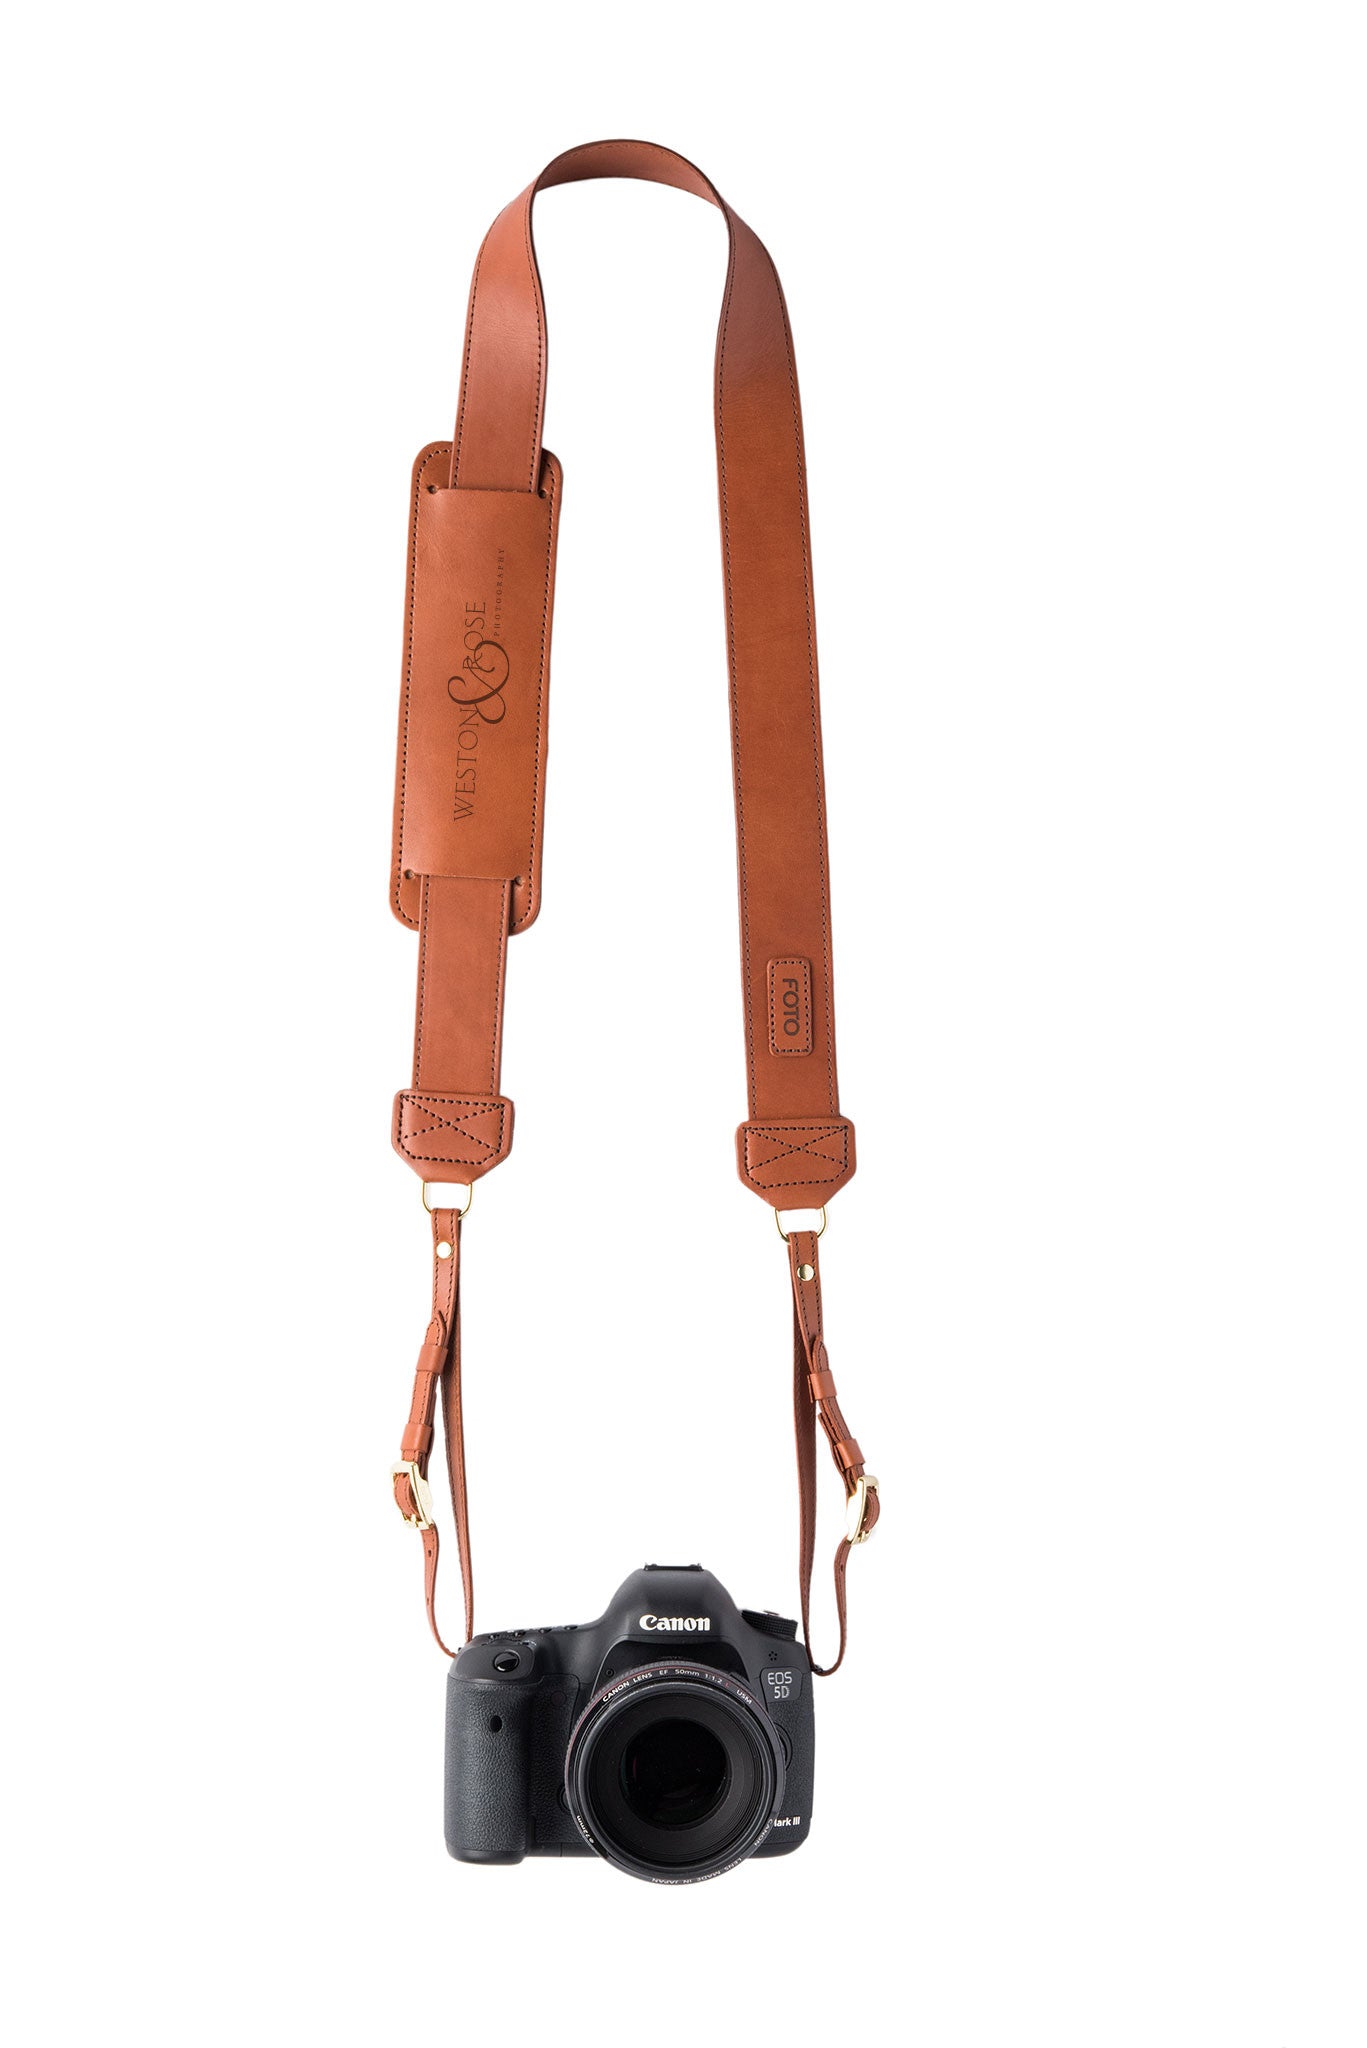 FOTO | James Fotostrap - a chestnut brown genuine all-leather camera strap that can be personalized with a monogram or business logo, making this leather camera strap the perfect personalized gift.